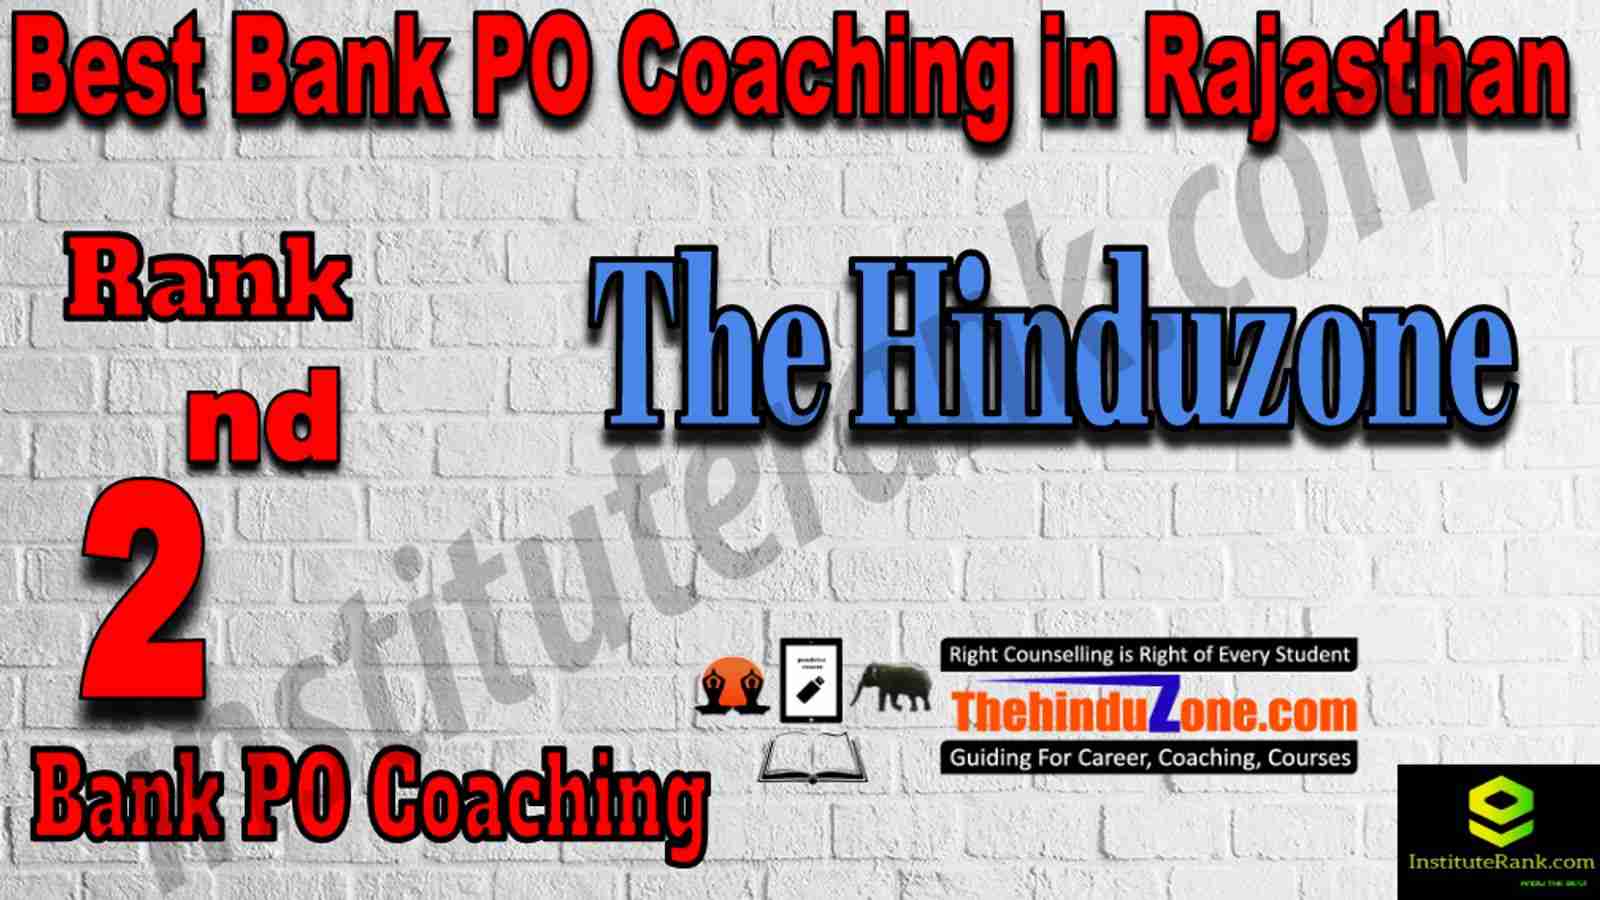 2nd Best Bank PO Coaching in Rajasthan